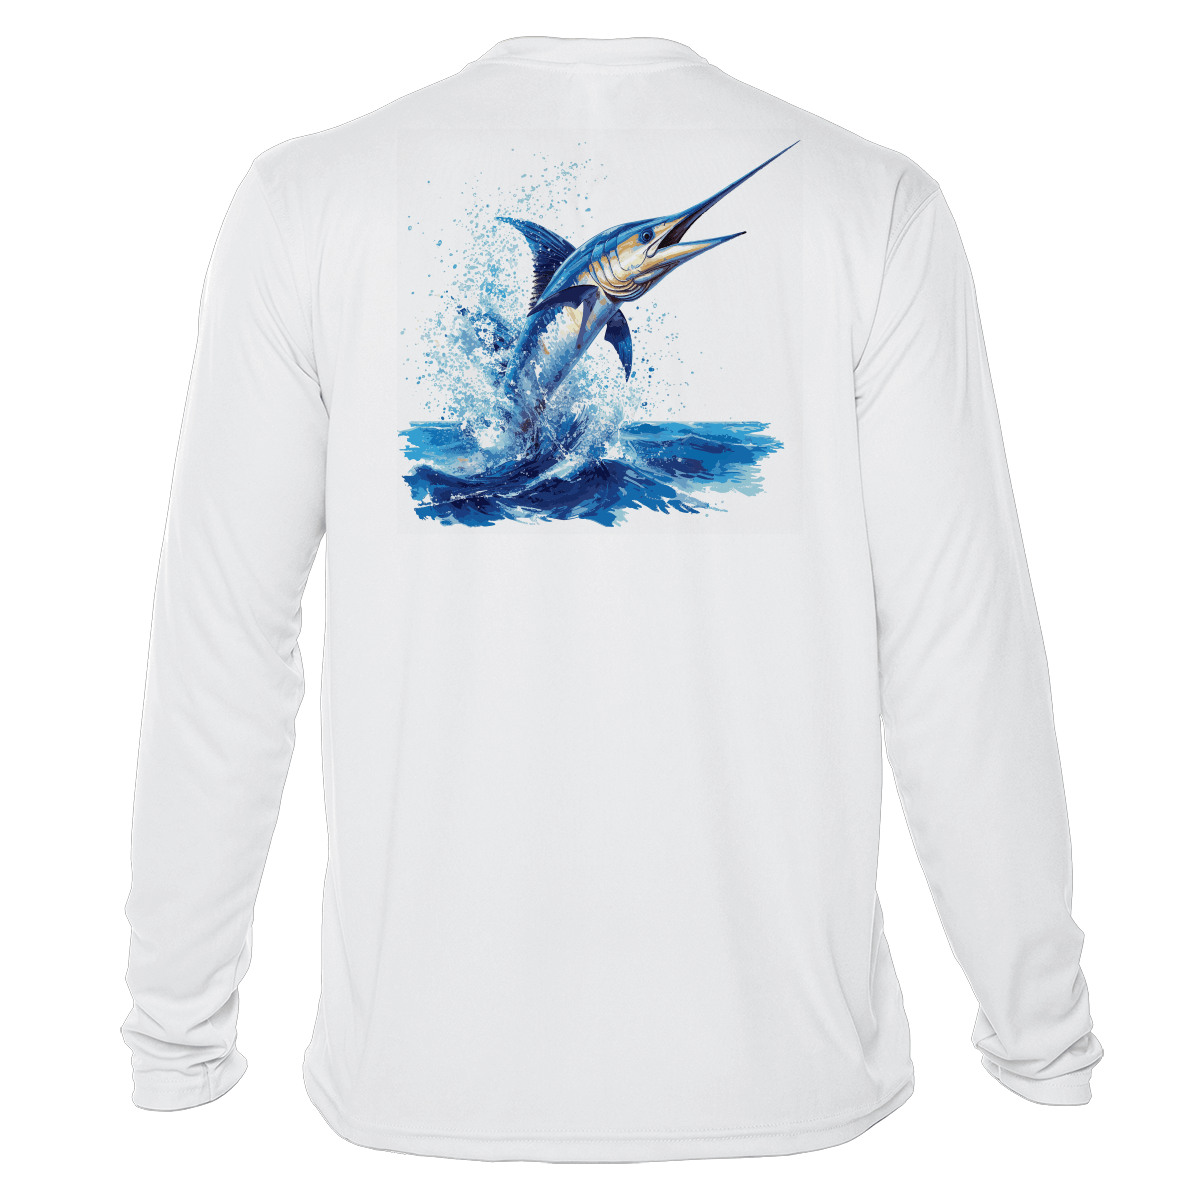 Fishing Shirt Outfitters - Angler's Collection: Blue Marlin - UPF 50+ Long Sleeve